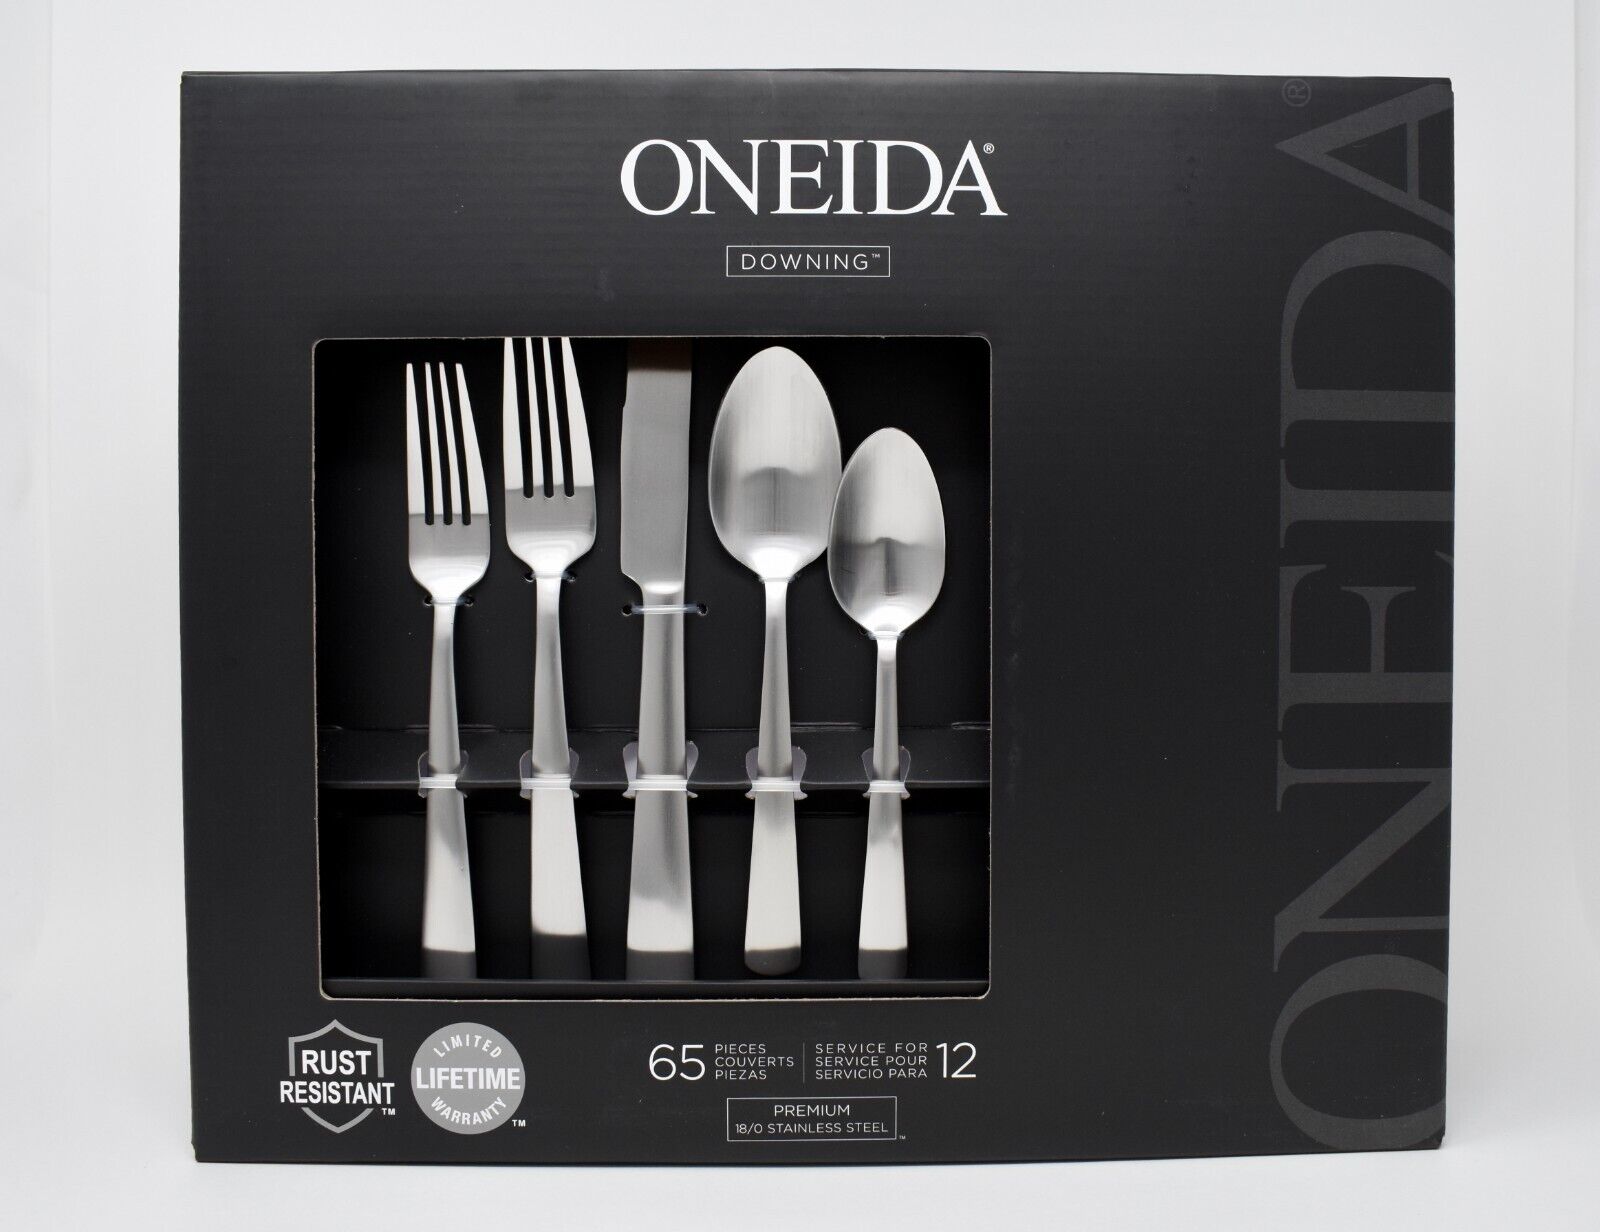 ONEIDA DOWNING 65-Piece Everyday Flatware Set, Service for 1